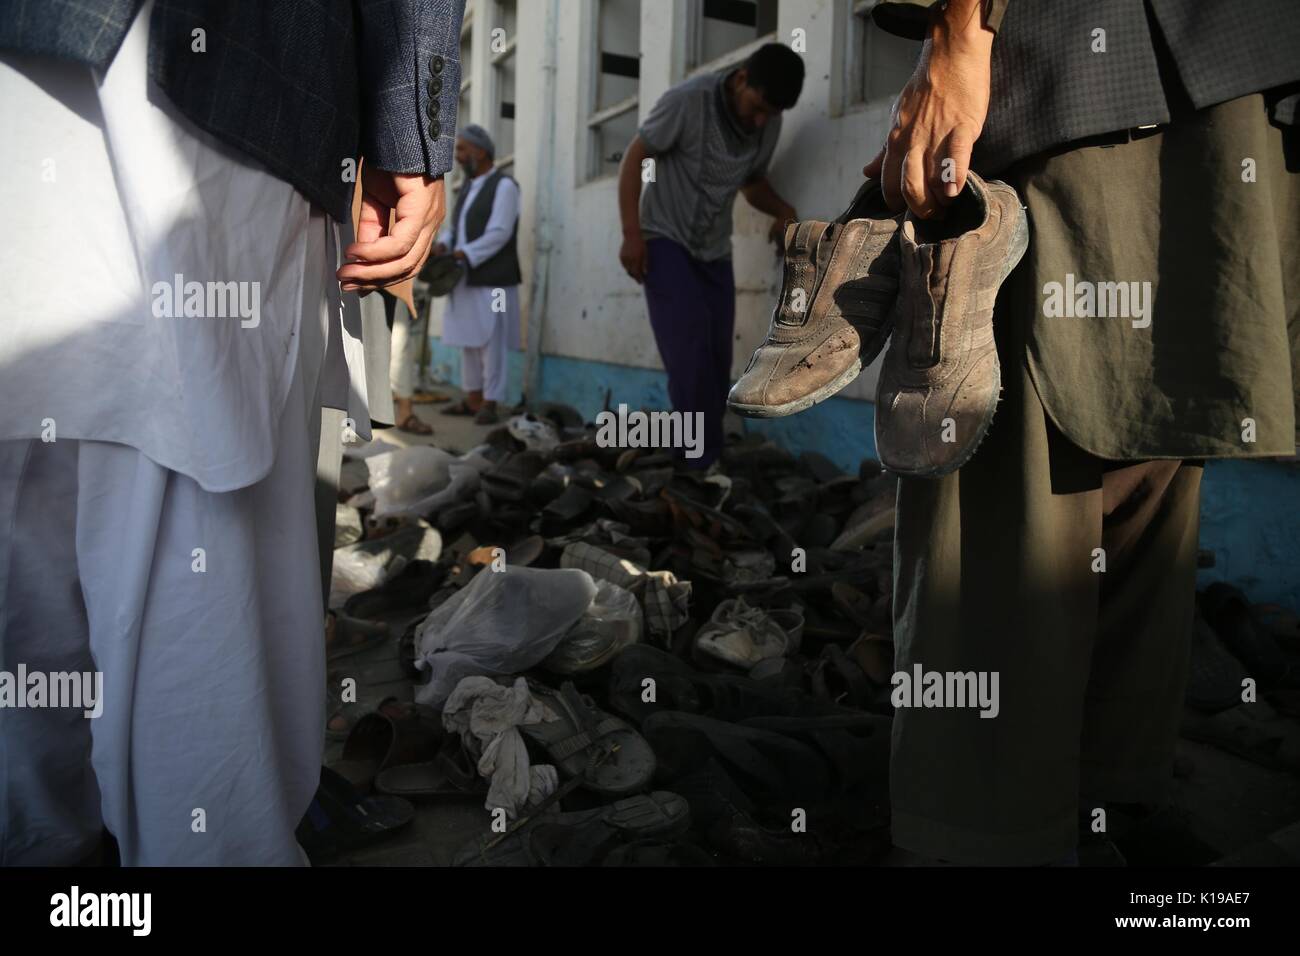 Kabul, Afghanistan. 26th Aug, 2017. People search for shoes of relatives at the site of attack in Kabul, capital of Afghanistan, Aug. 26, 2017. The death toll of the mosque attack on Friday has risen to 40 while 90 people were wounded, the Afghan Independent Human Rights Commission said on Saturday. Credit: Rahmat Alizadah/Xinhua/Alamy Live News Stock Photo